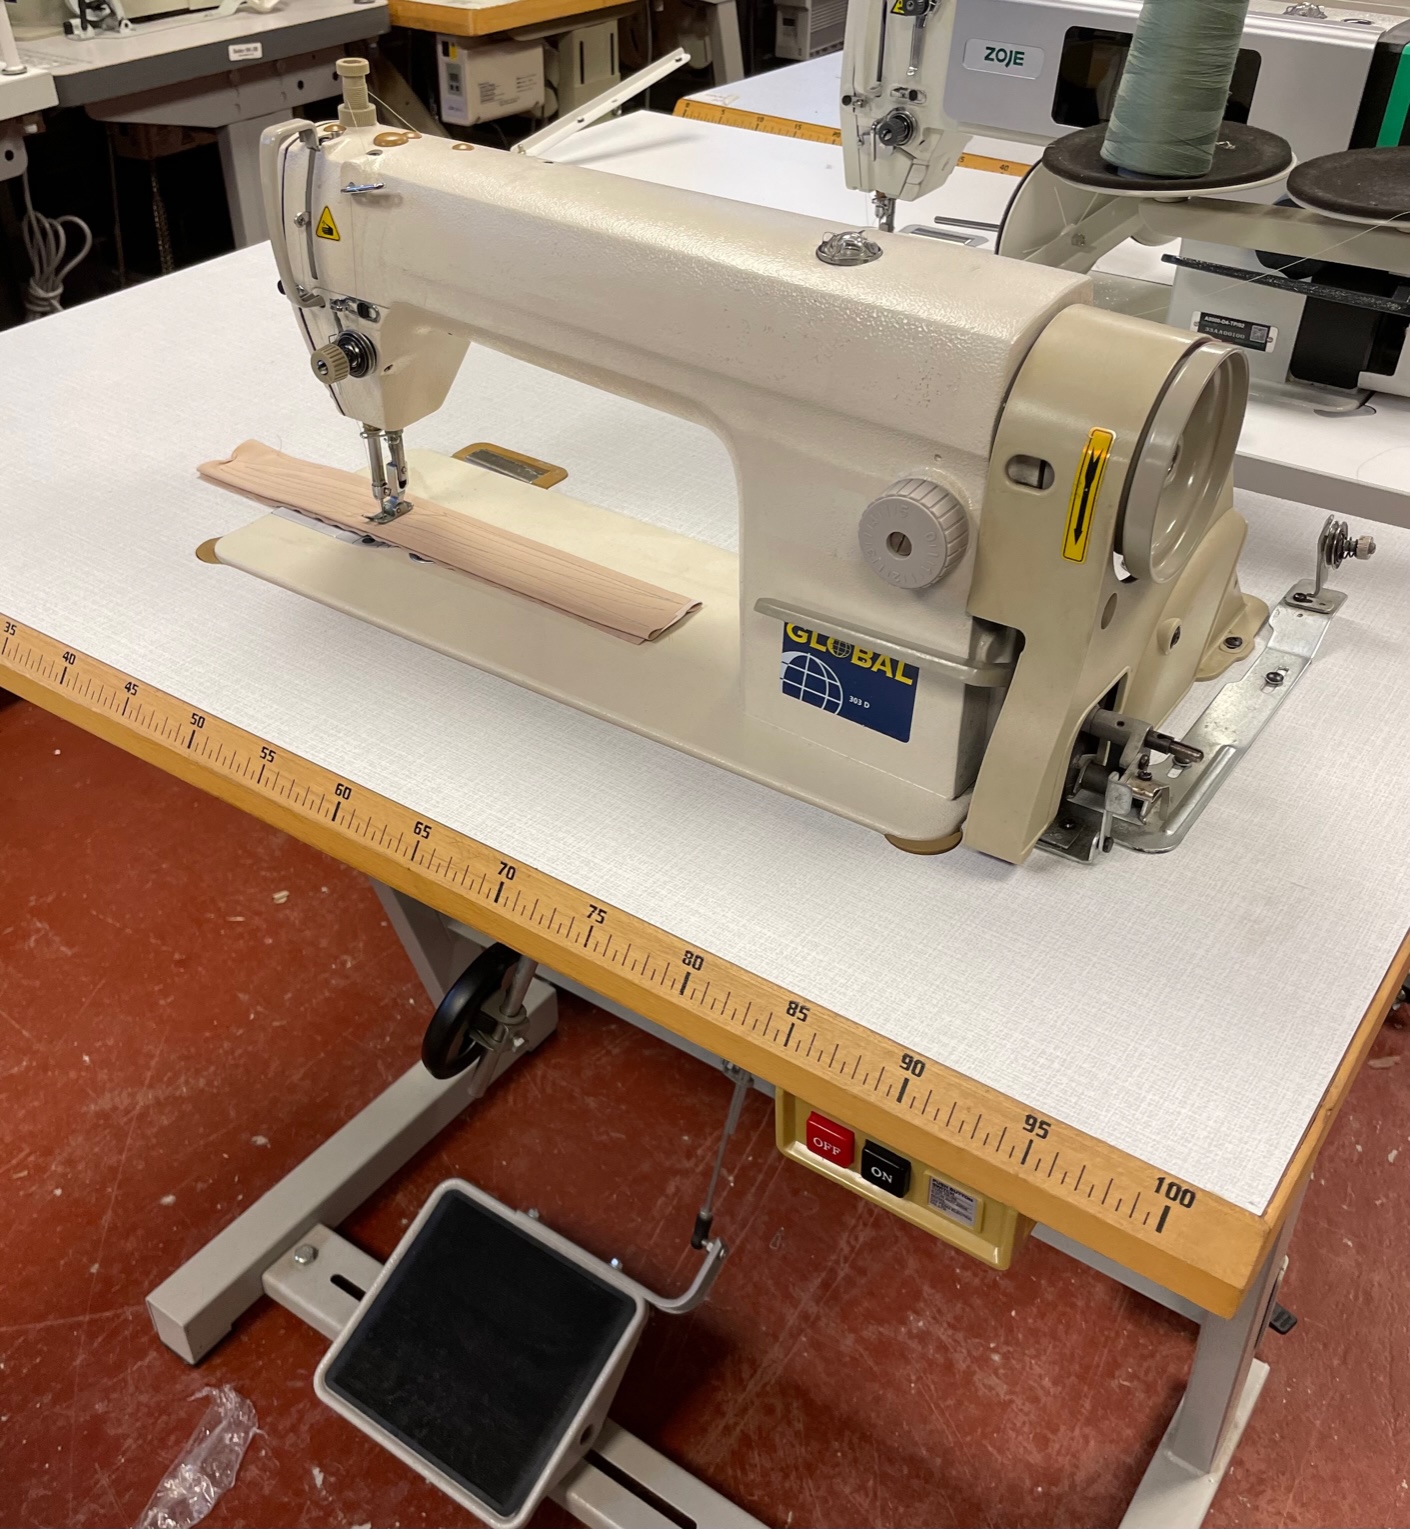 Global 303D industrial flat bed sewing machine (Used)